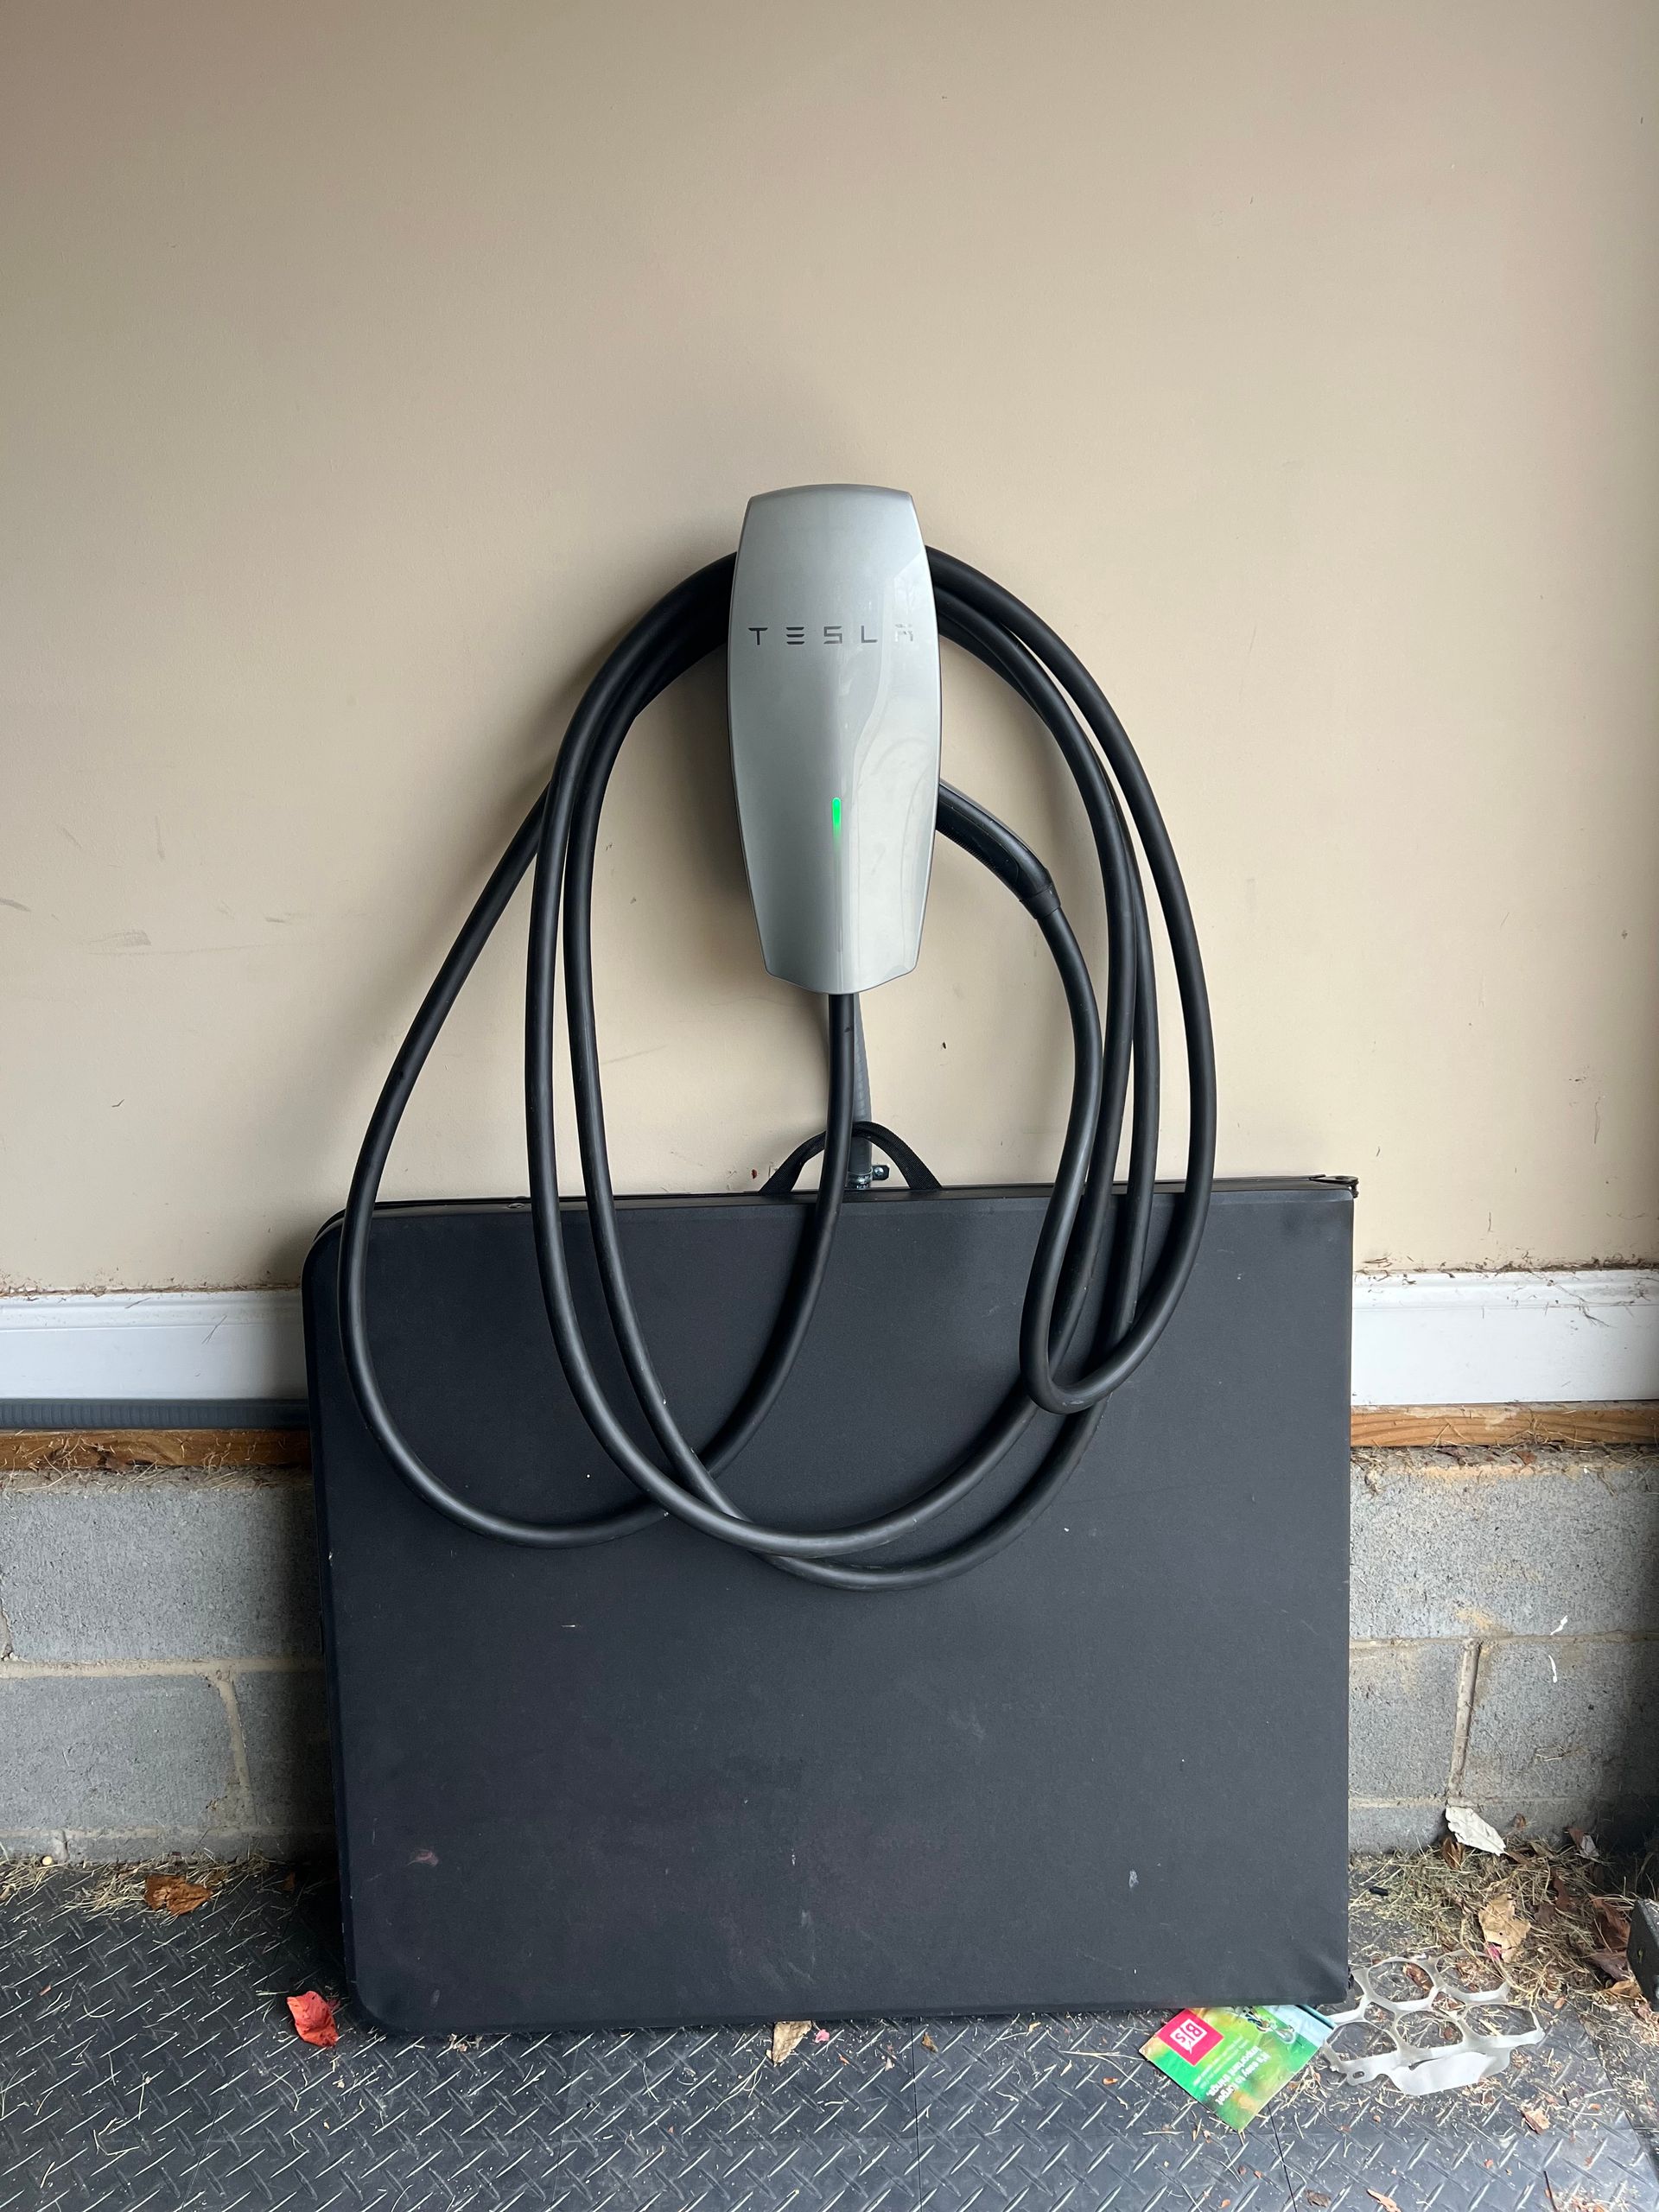 Tesla home charging station in a residential garage